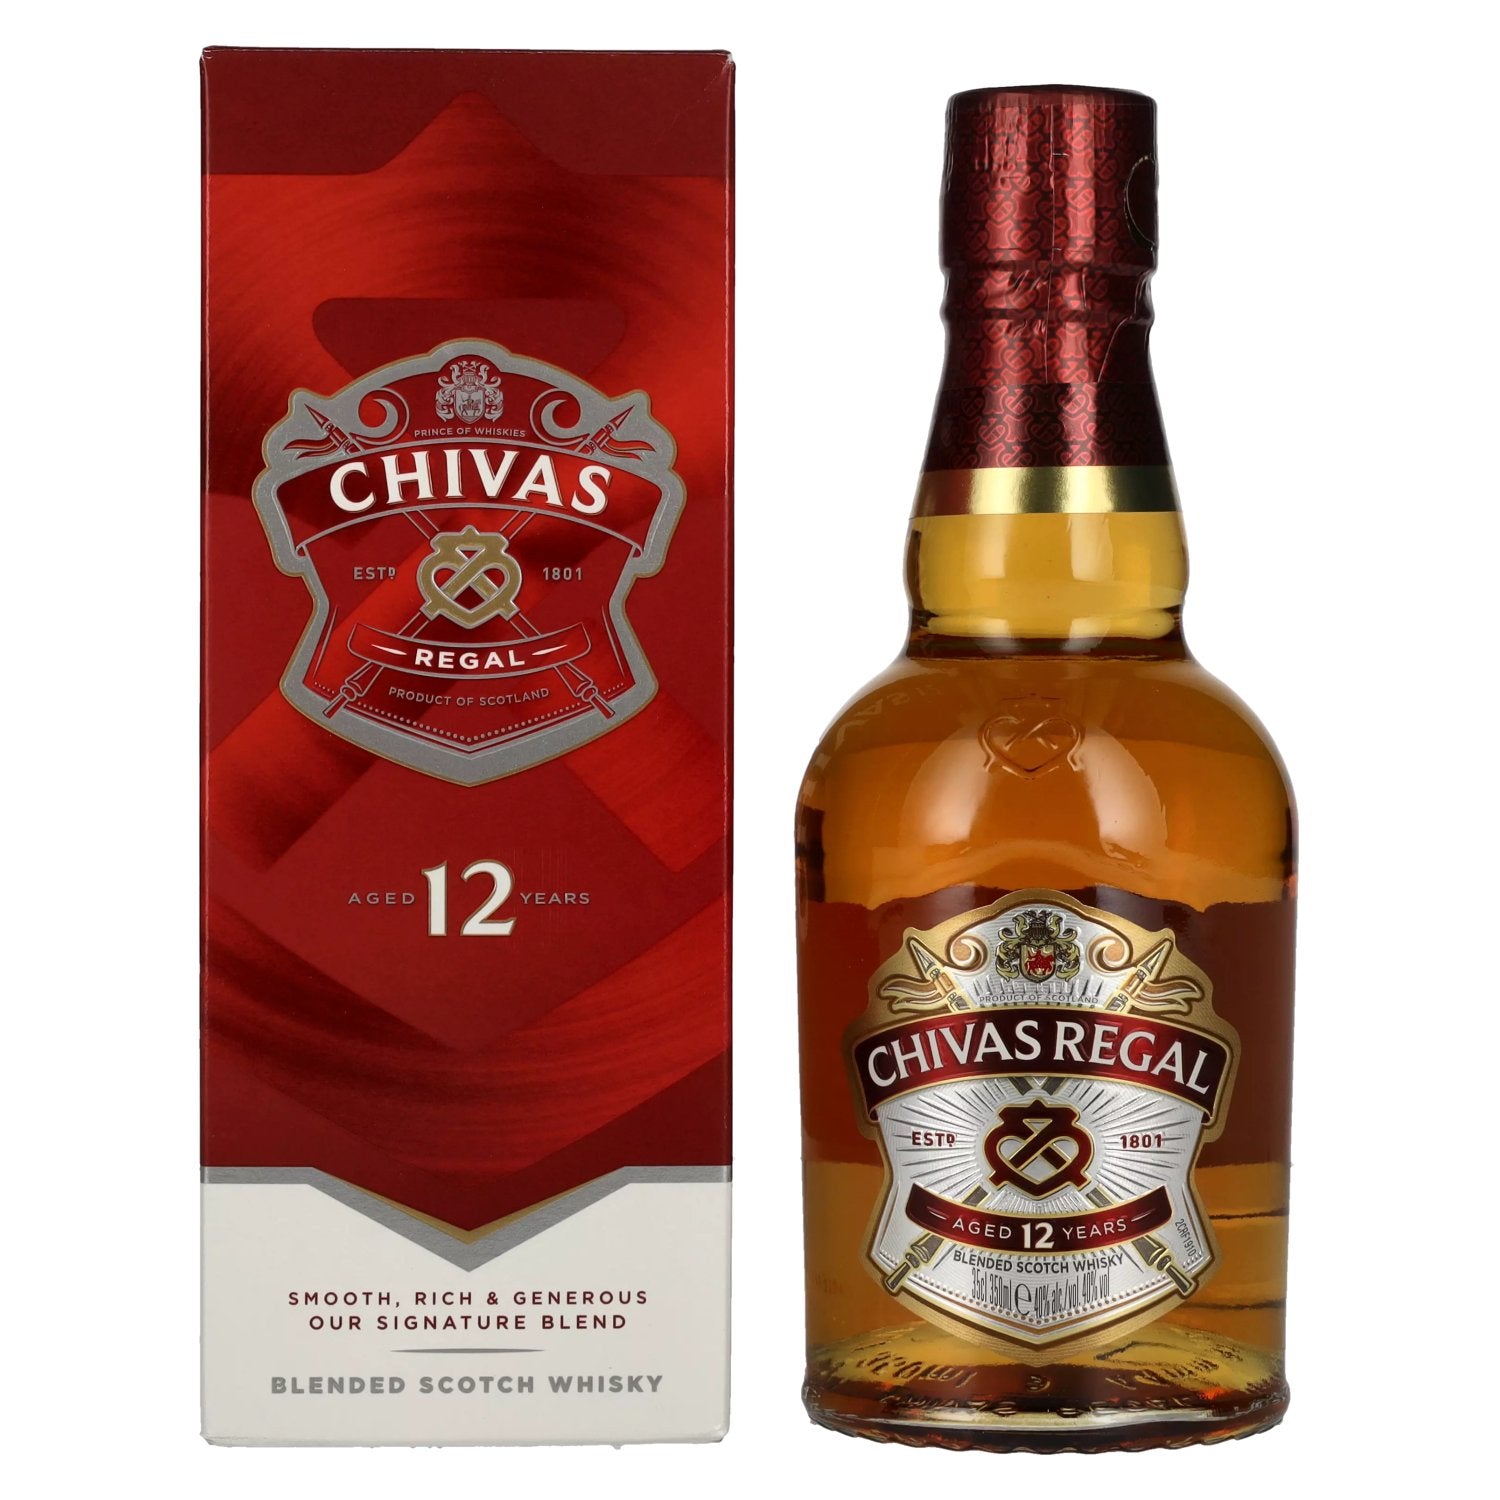 Chivas Regal 12 Years Old Blended Scotch Whisky 40% Vol. 0,35l in Giftbox